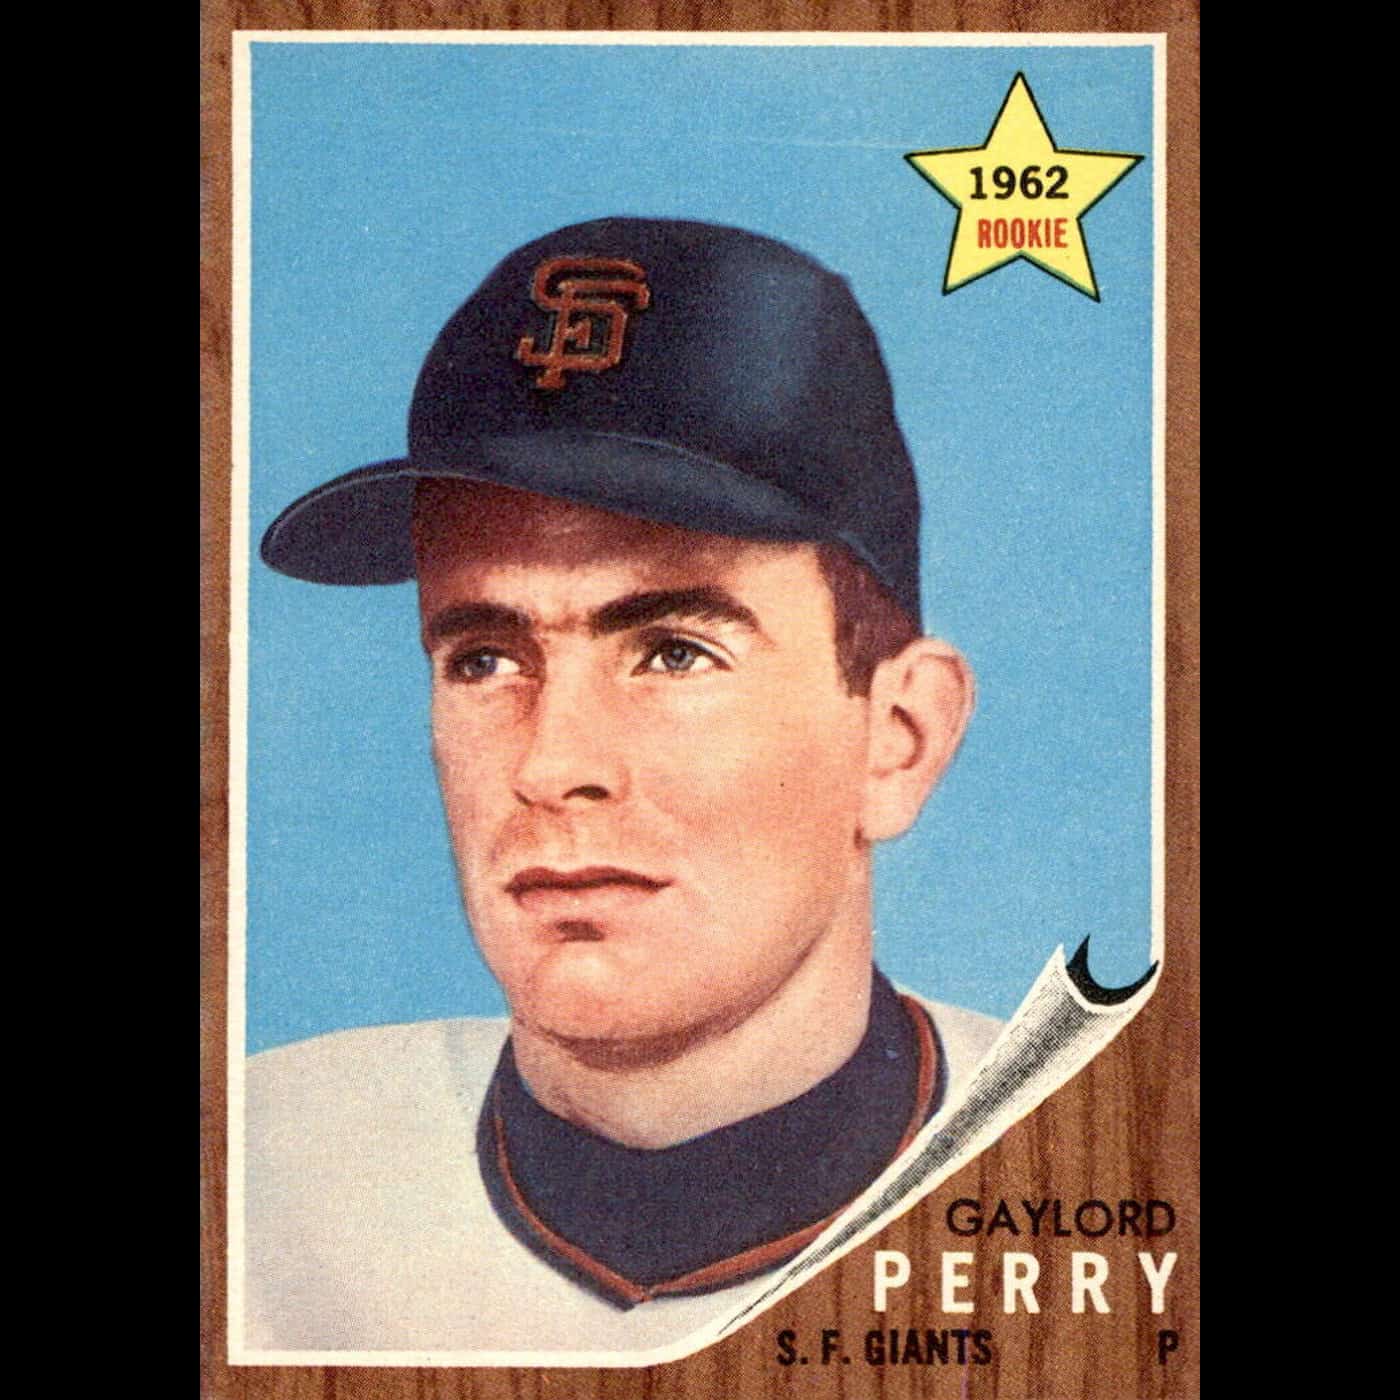 Gaylord Perry – Society for American Baseball Research